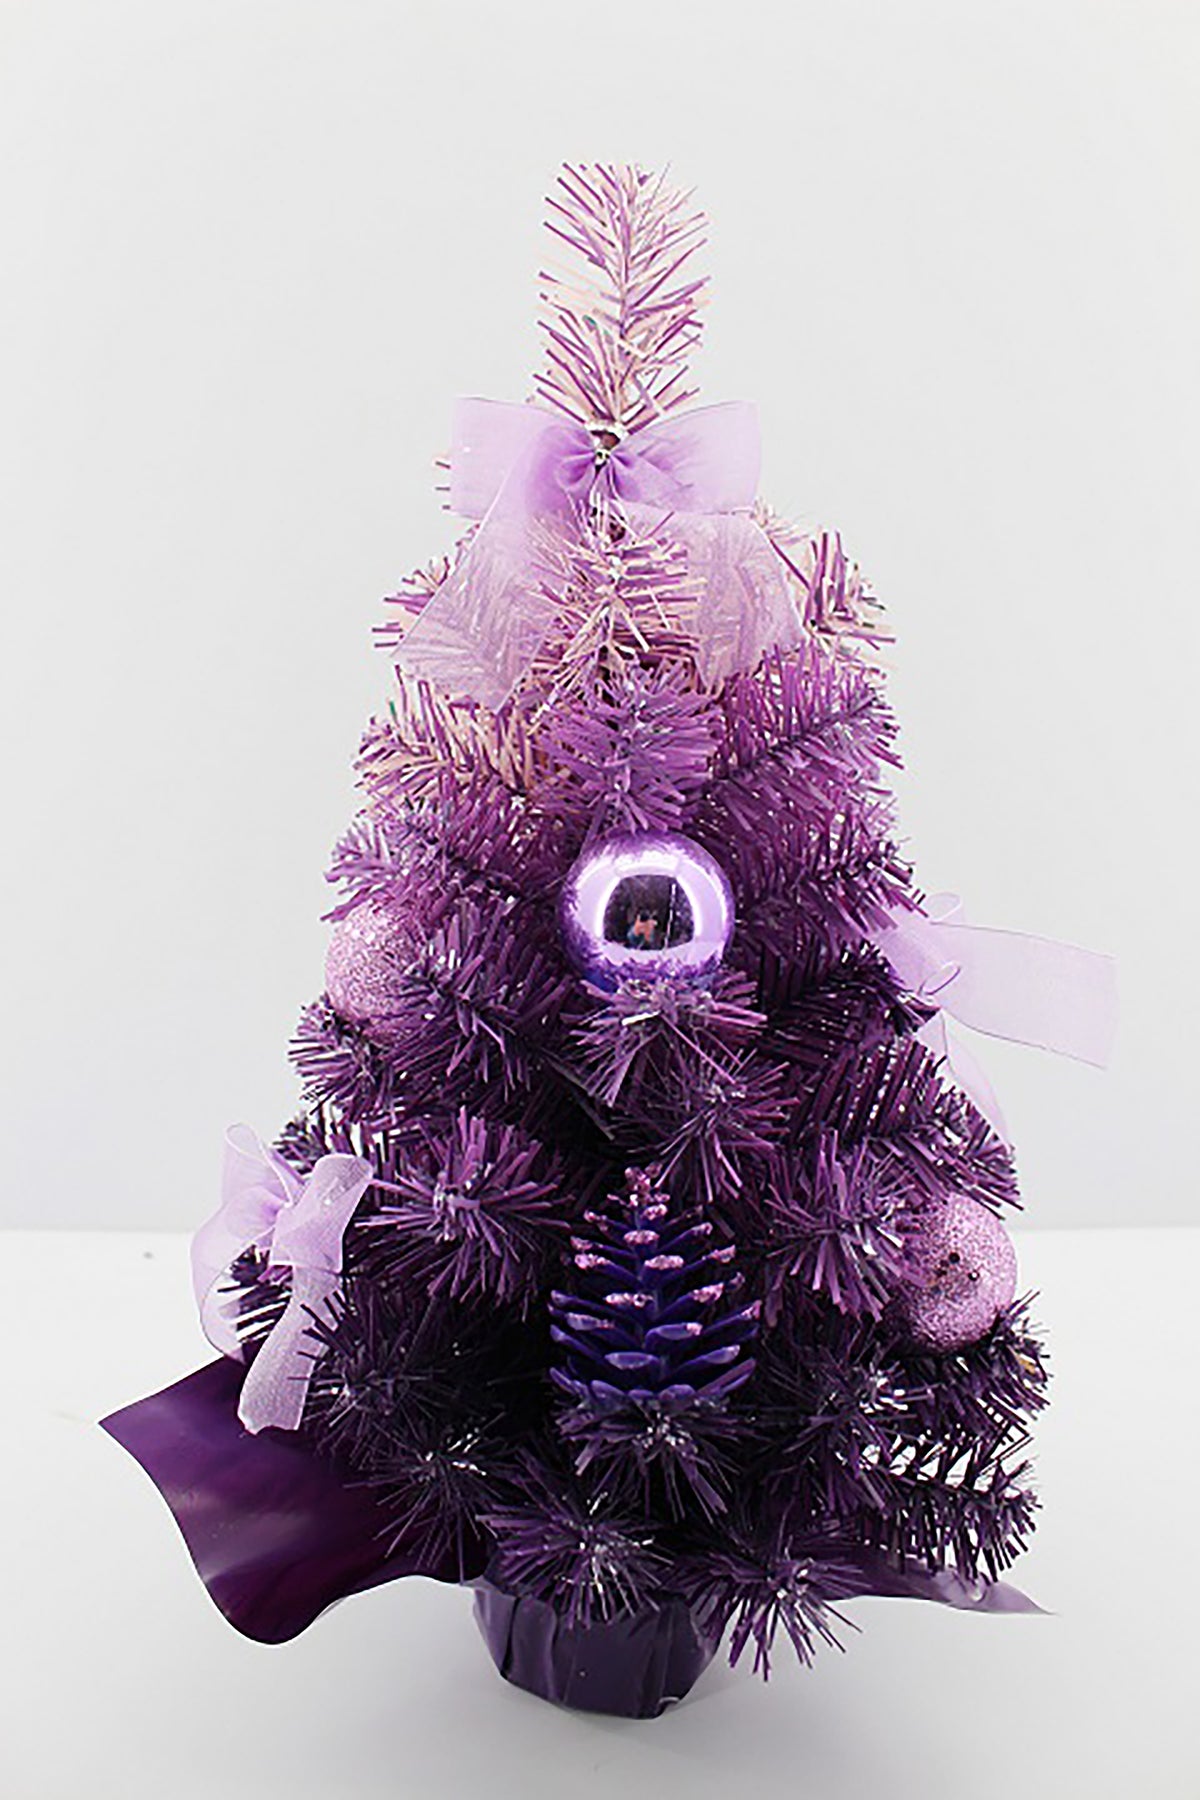 Handcrafted Tabletop Christmas Tree with LED Lights and Ornaments